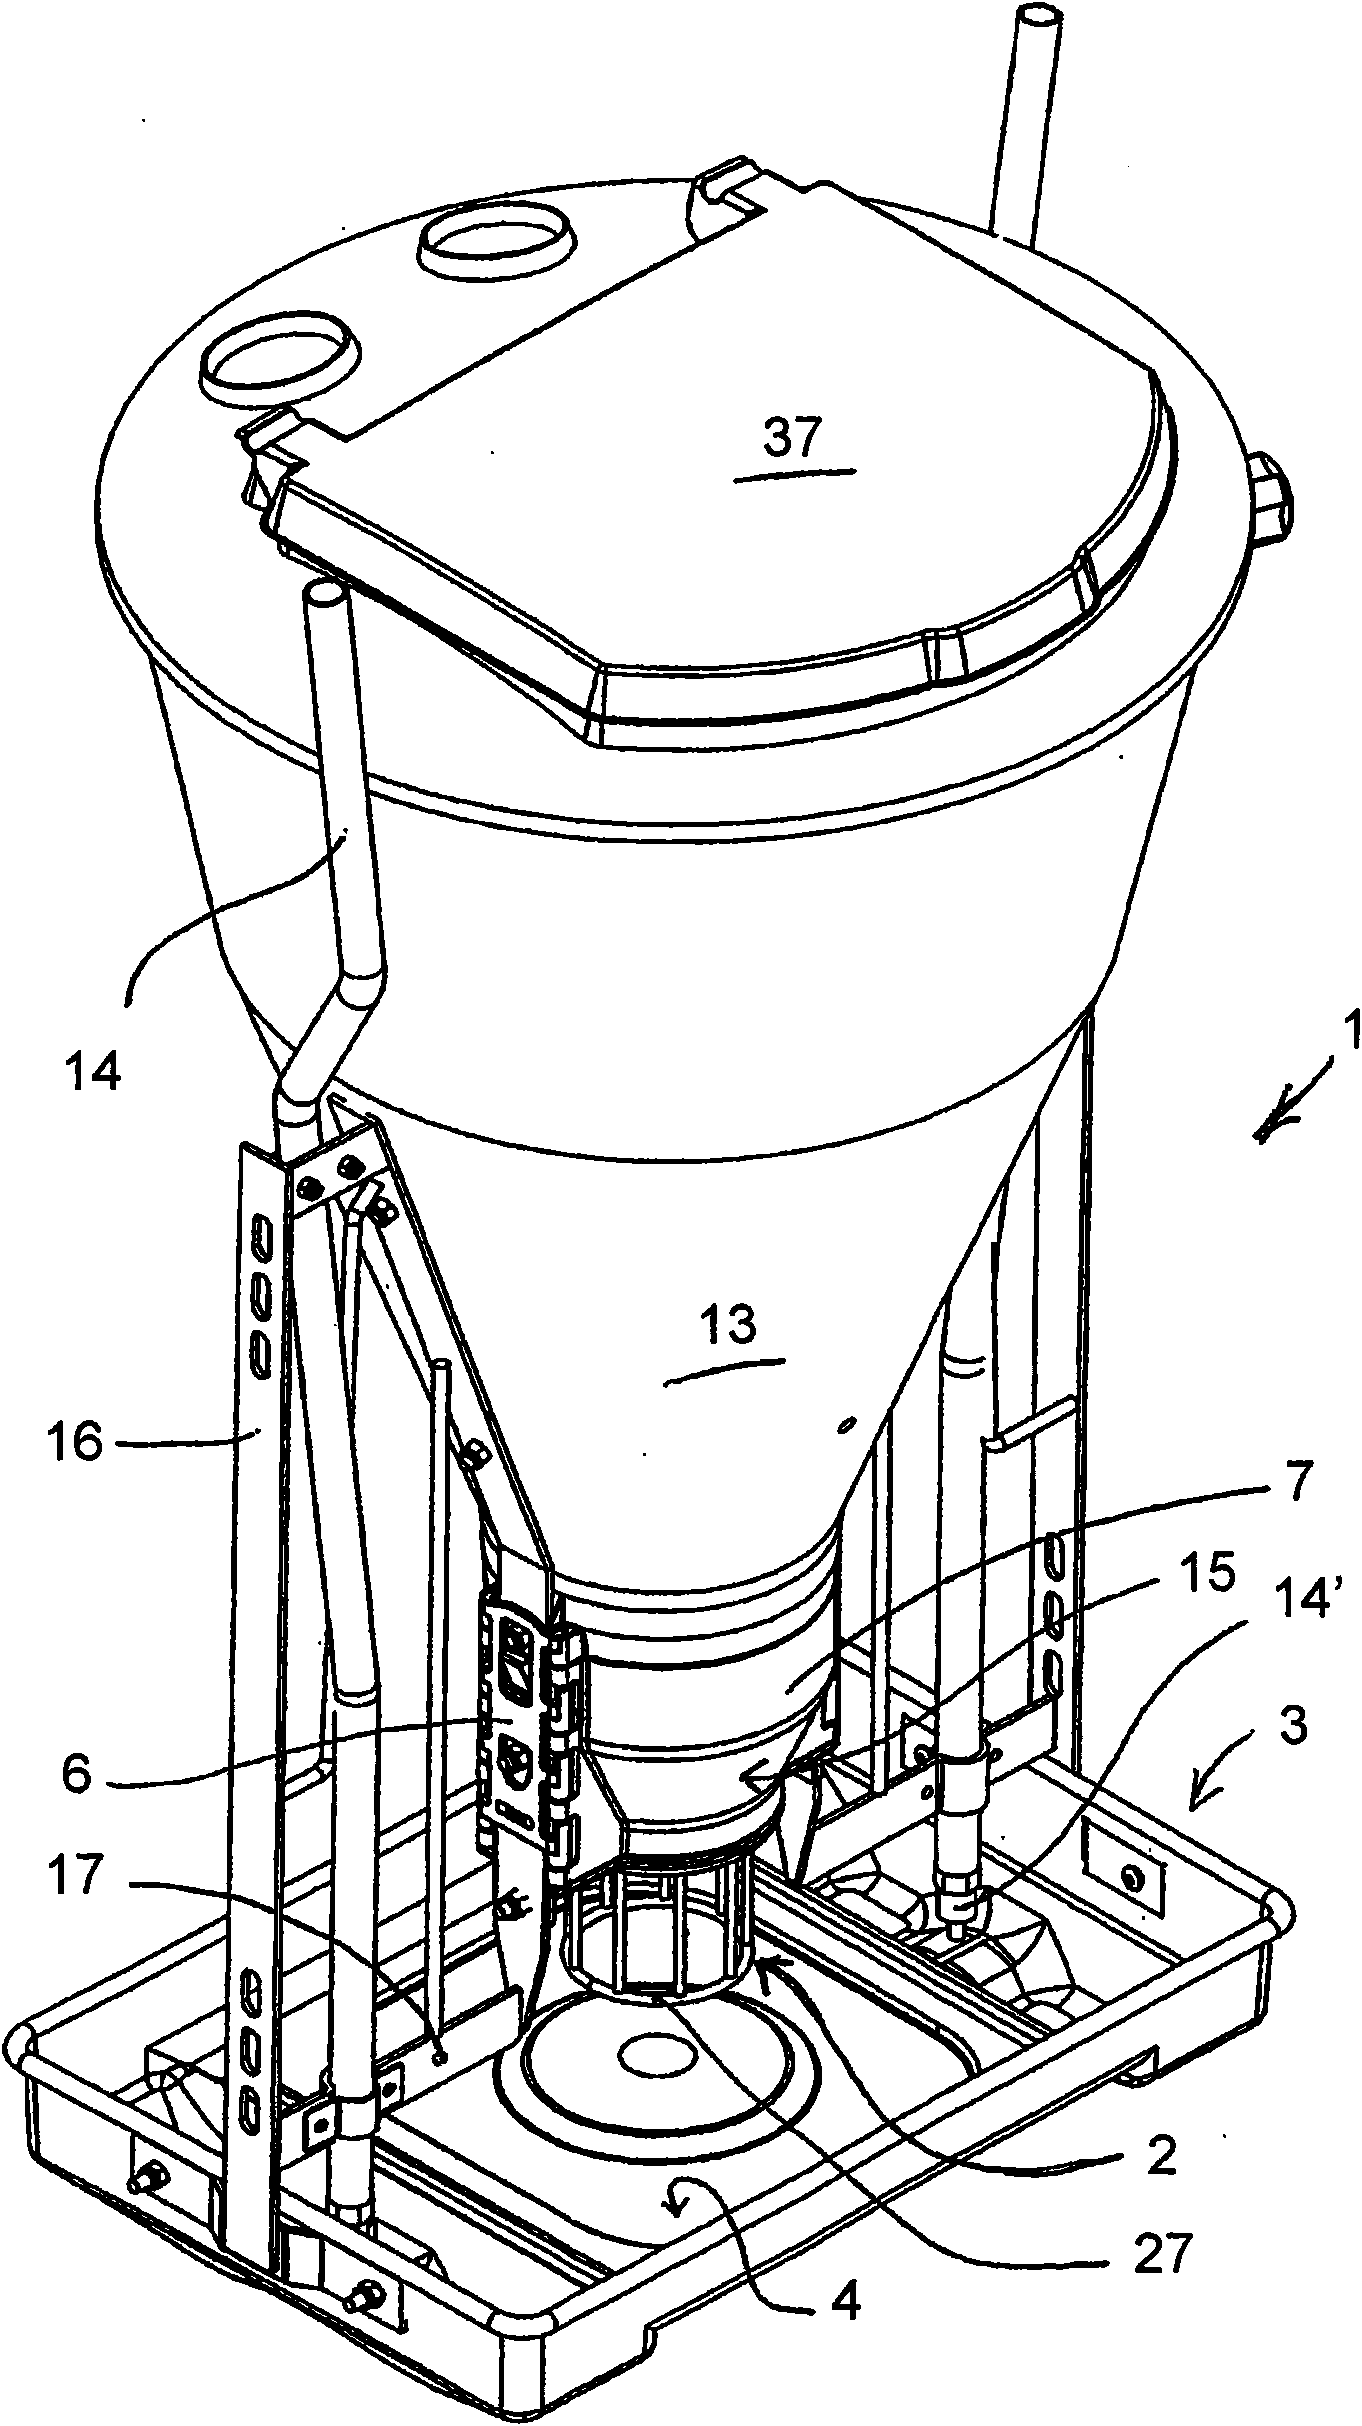 Feeding device with grate